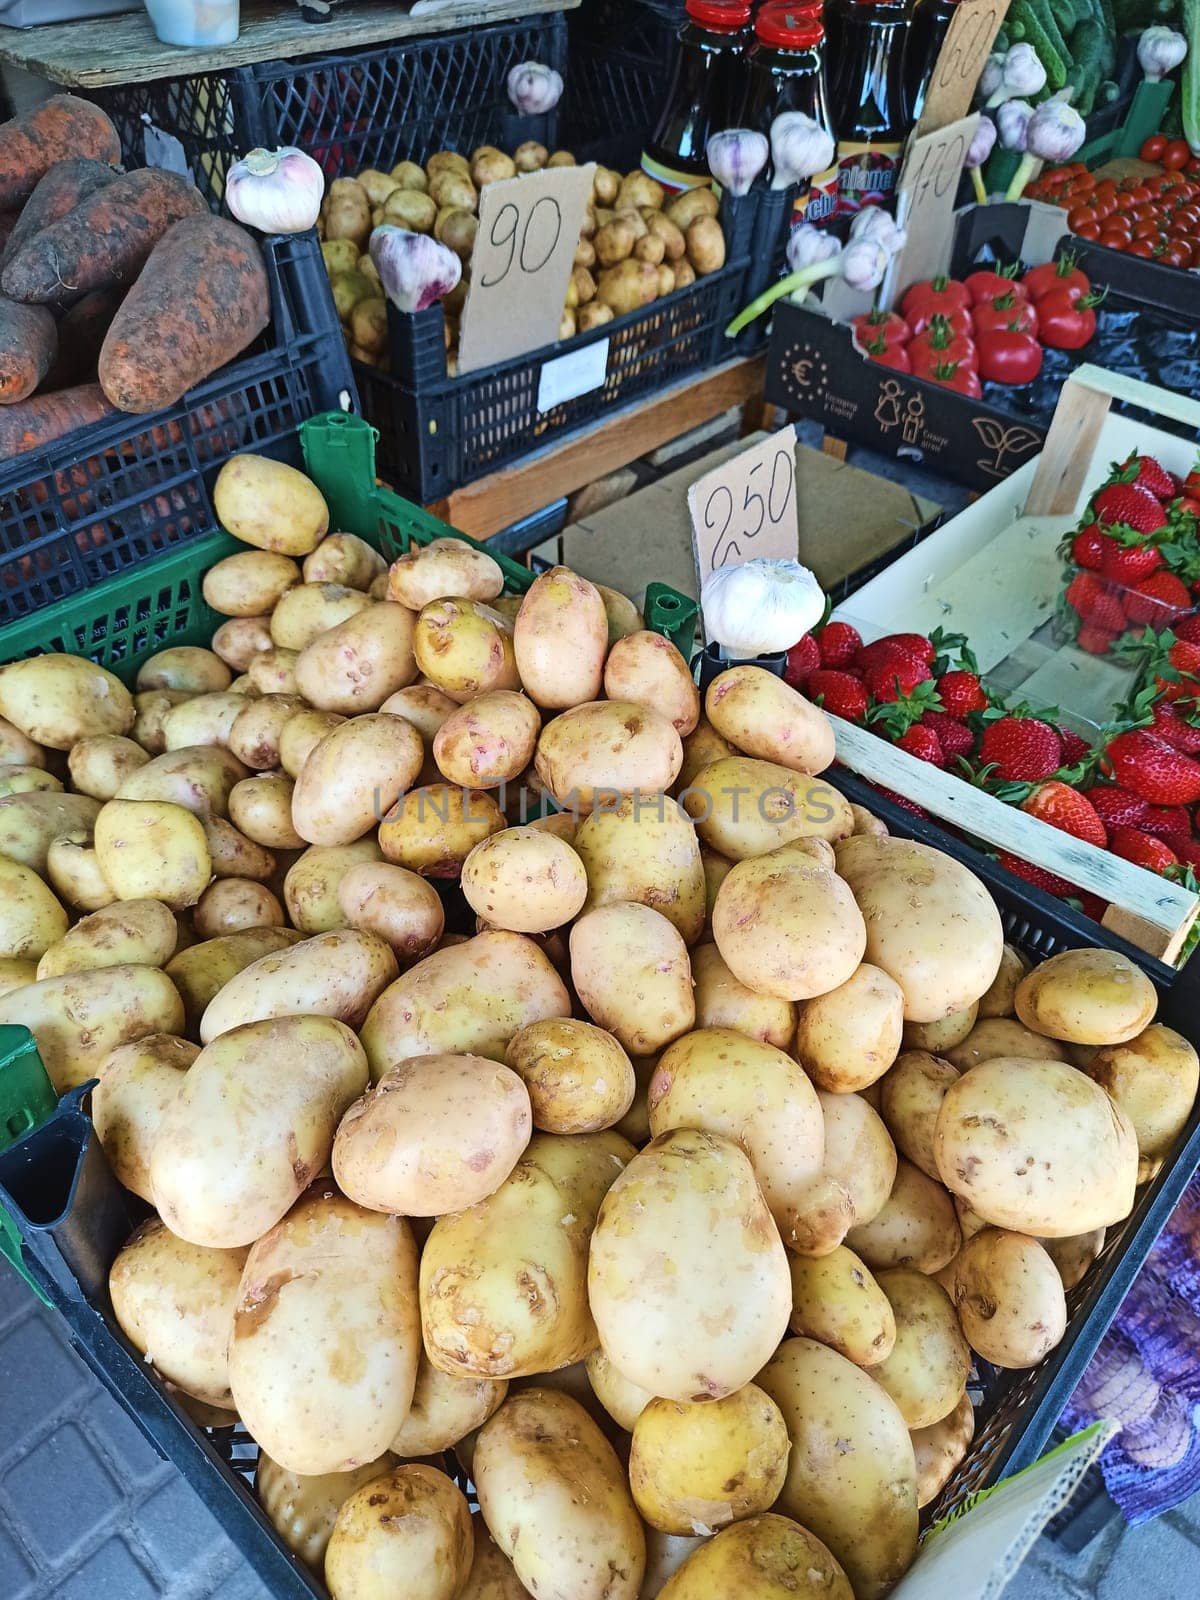 Fresh ripe young potatoes harvest on the shelves of farmer market. Food industry and consumerism concept. Agriculture. Agricultural hobby and business. Eco farming. Sustainable lifestyles